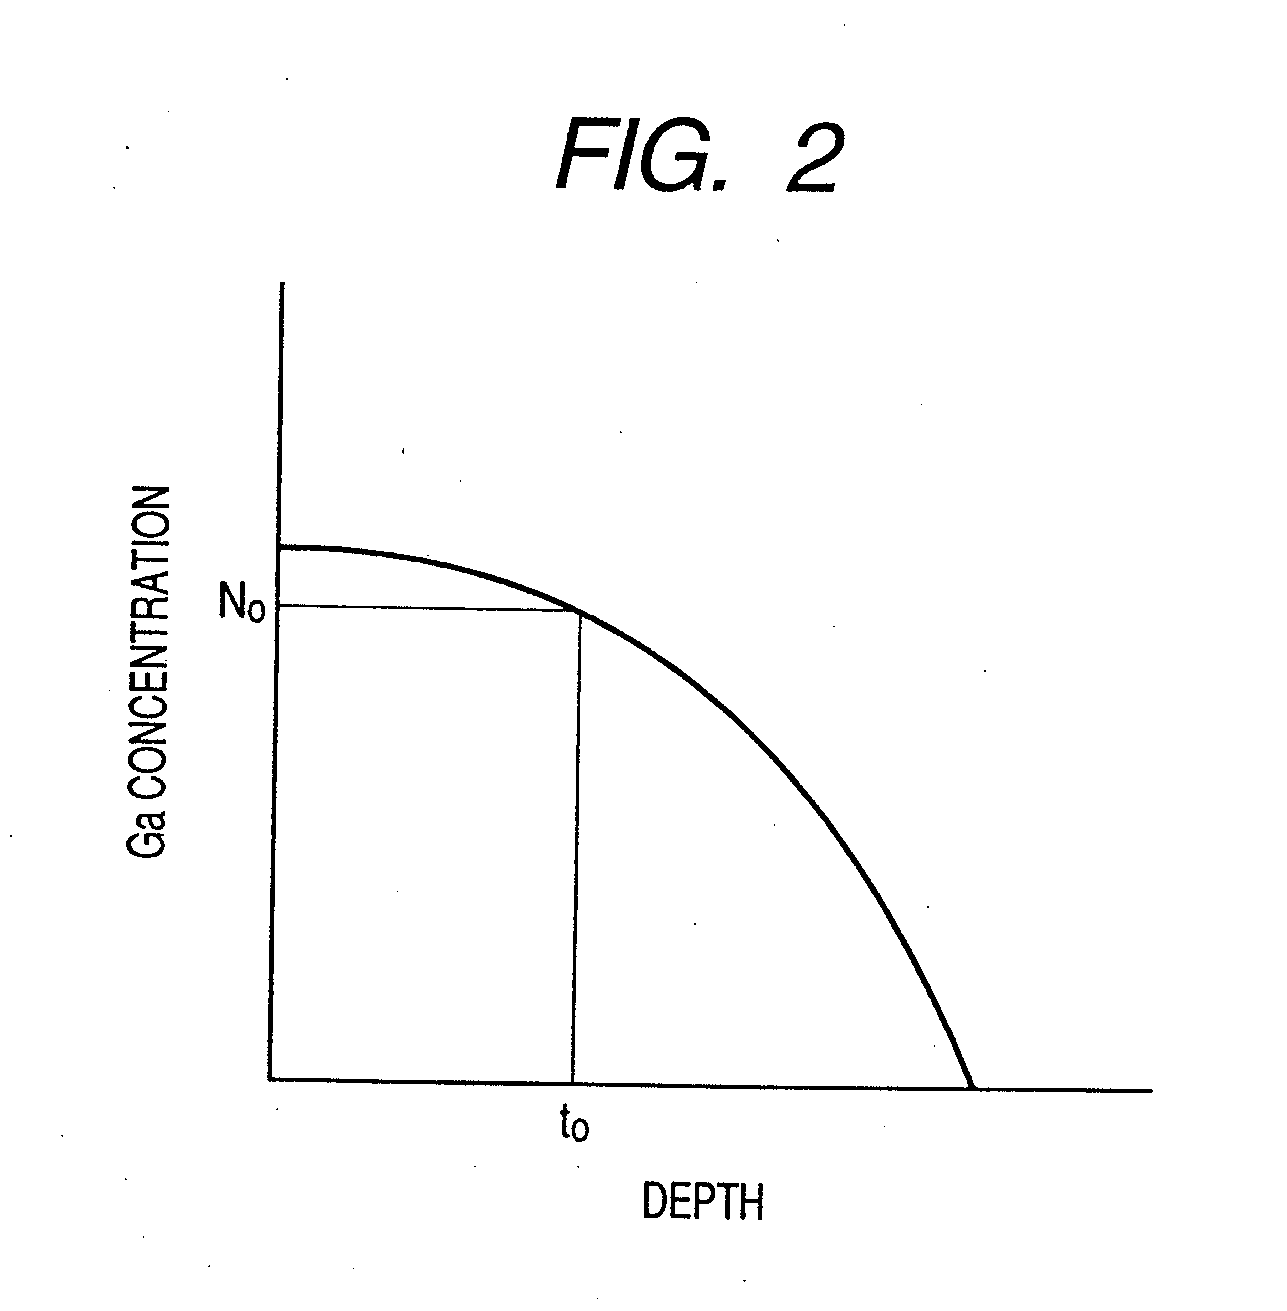 Method of Manufacturing A Nano Structure By Etching, Using A Substrate Containing Silicon